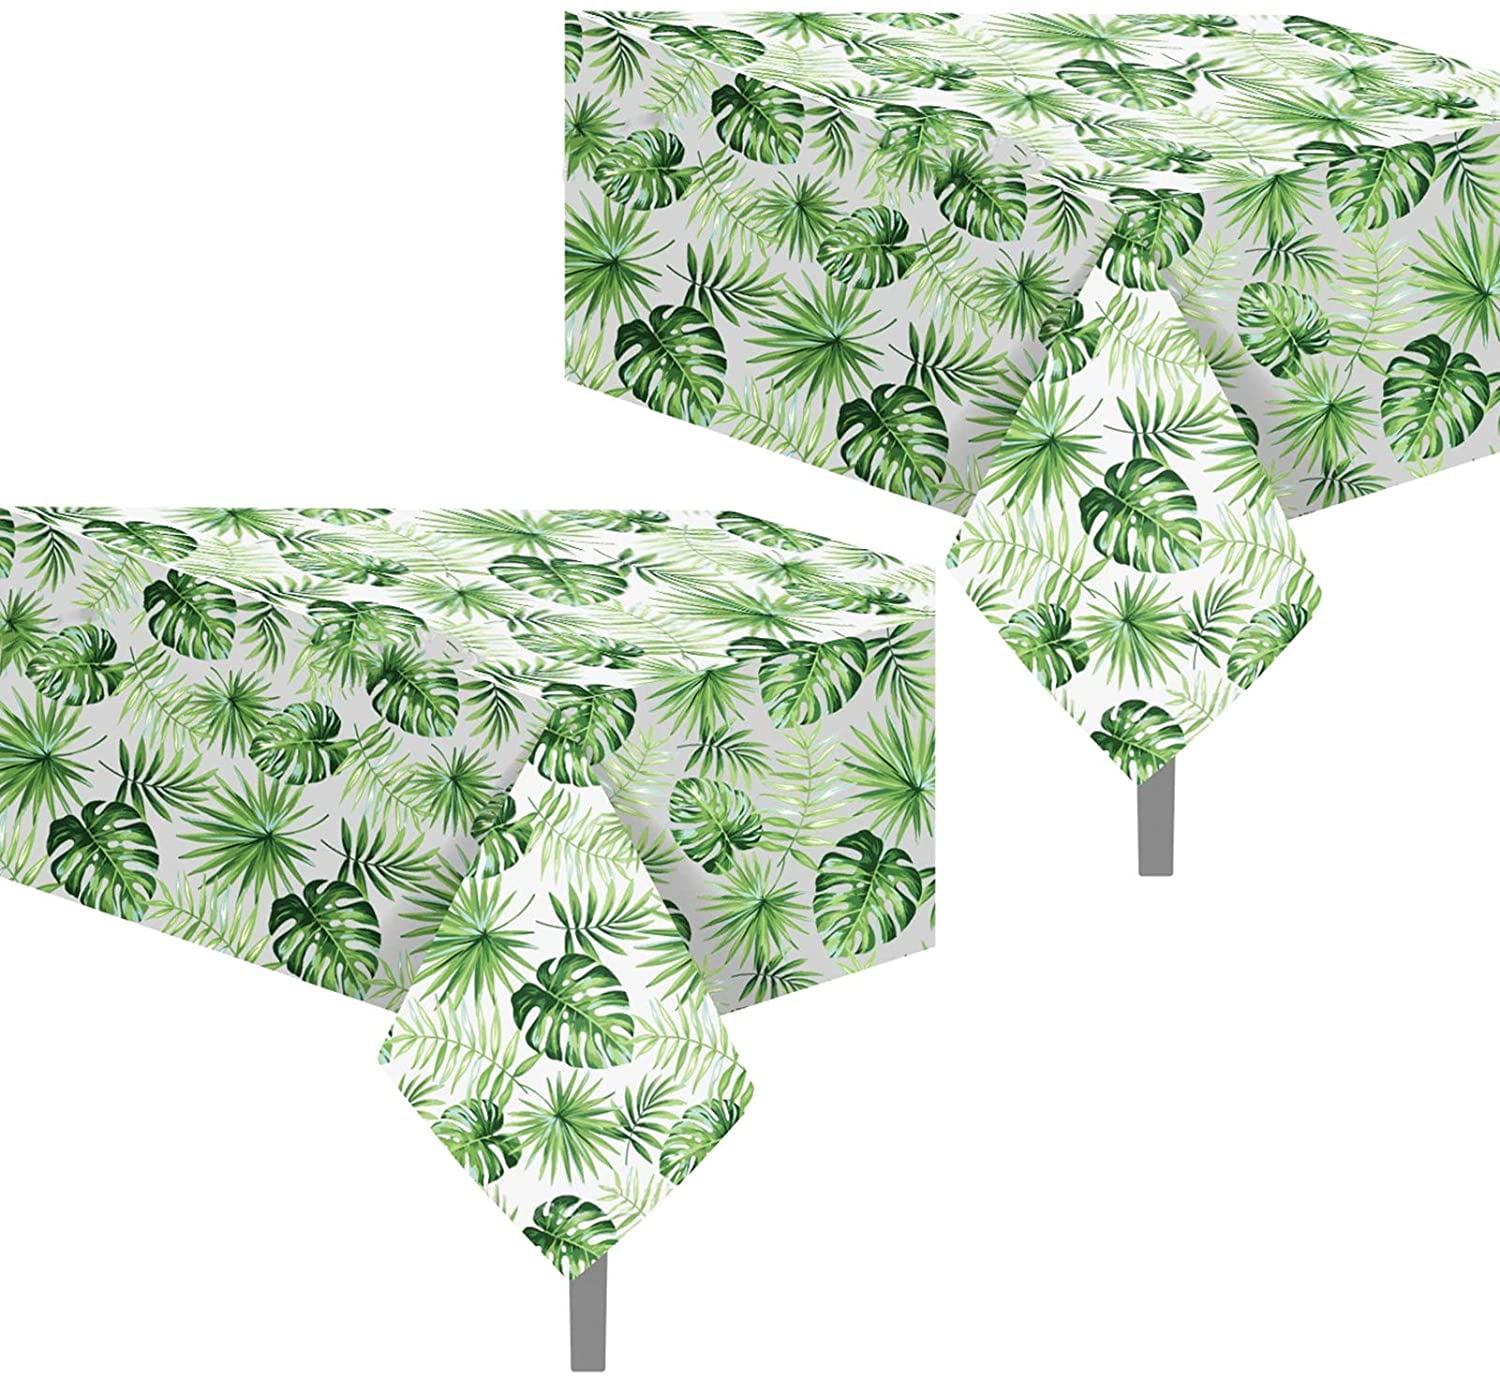 3 Pcs Hawaii Tropical Leaves Tablecloth Disposable Plastic Aloha Rectangular Table Covers 51x86 Inch Hawaiian Luau Table Covers for Aloha Tiki Party Supplies Summer Pool Tropical Party Decorations 